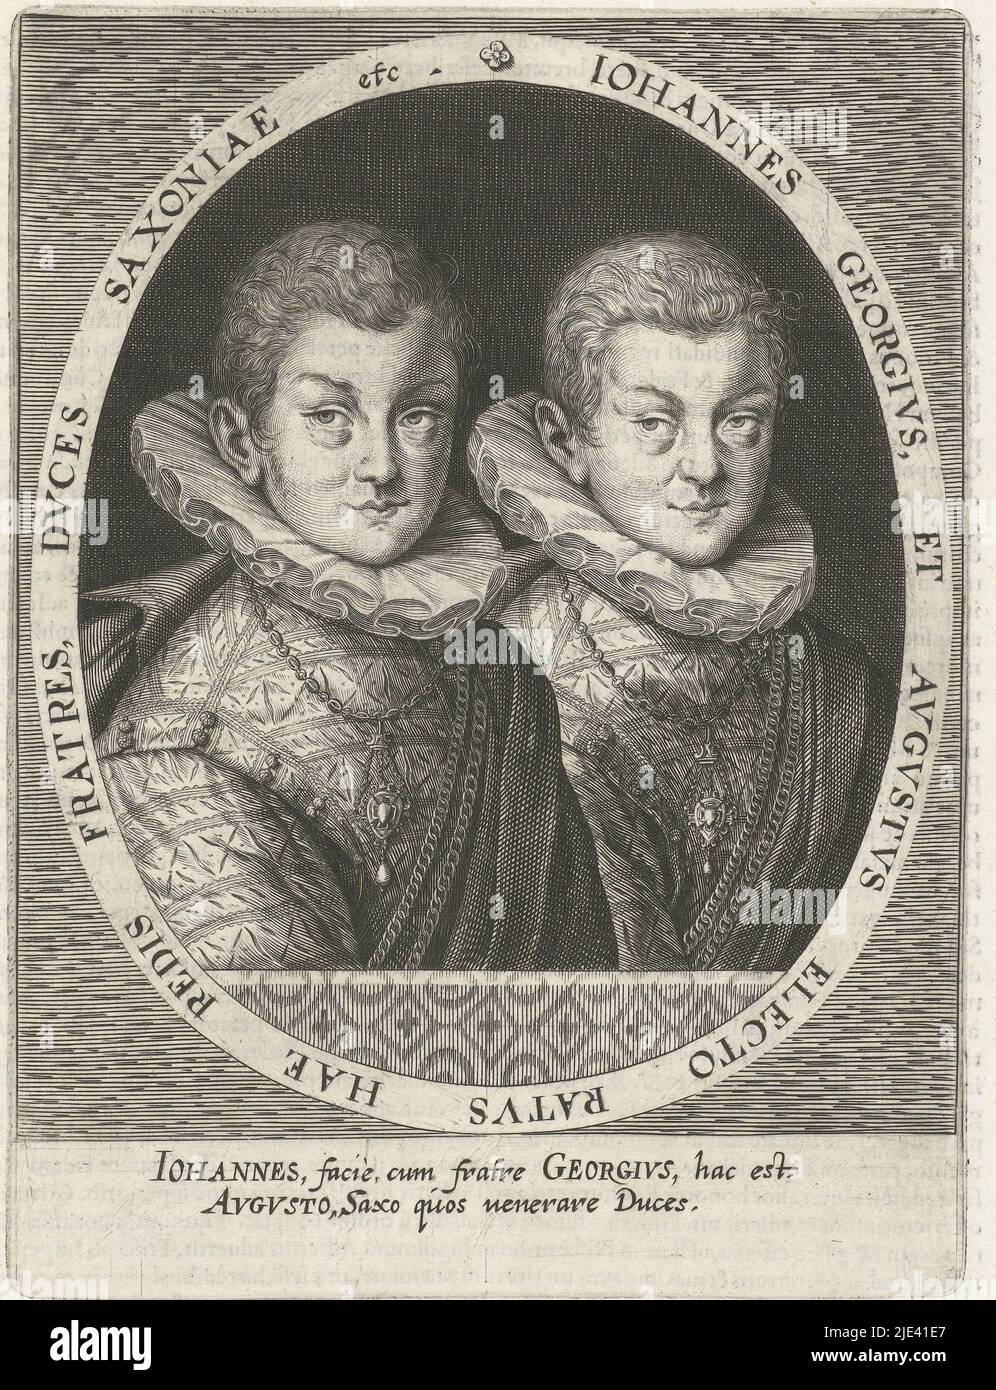 Double portrait of Johann Georg and August of Saxony, Dominicus Custos, 1601, print maker: Dominicus Custos, Augsburg, 1601, paper, engraving, letterpress printing, h 193 mm × w 142 mm, h 285 mm × w 200 mm Stock Photo